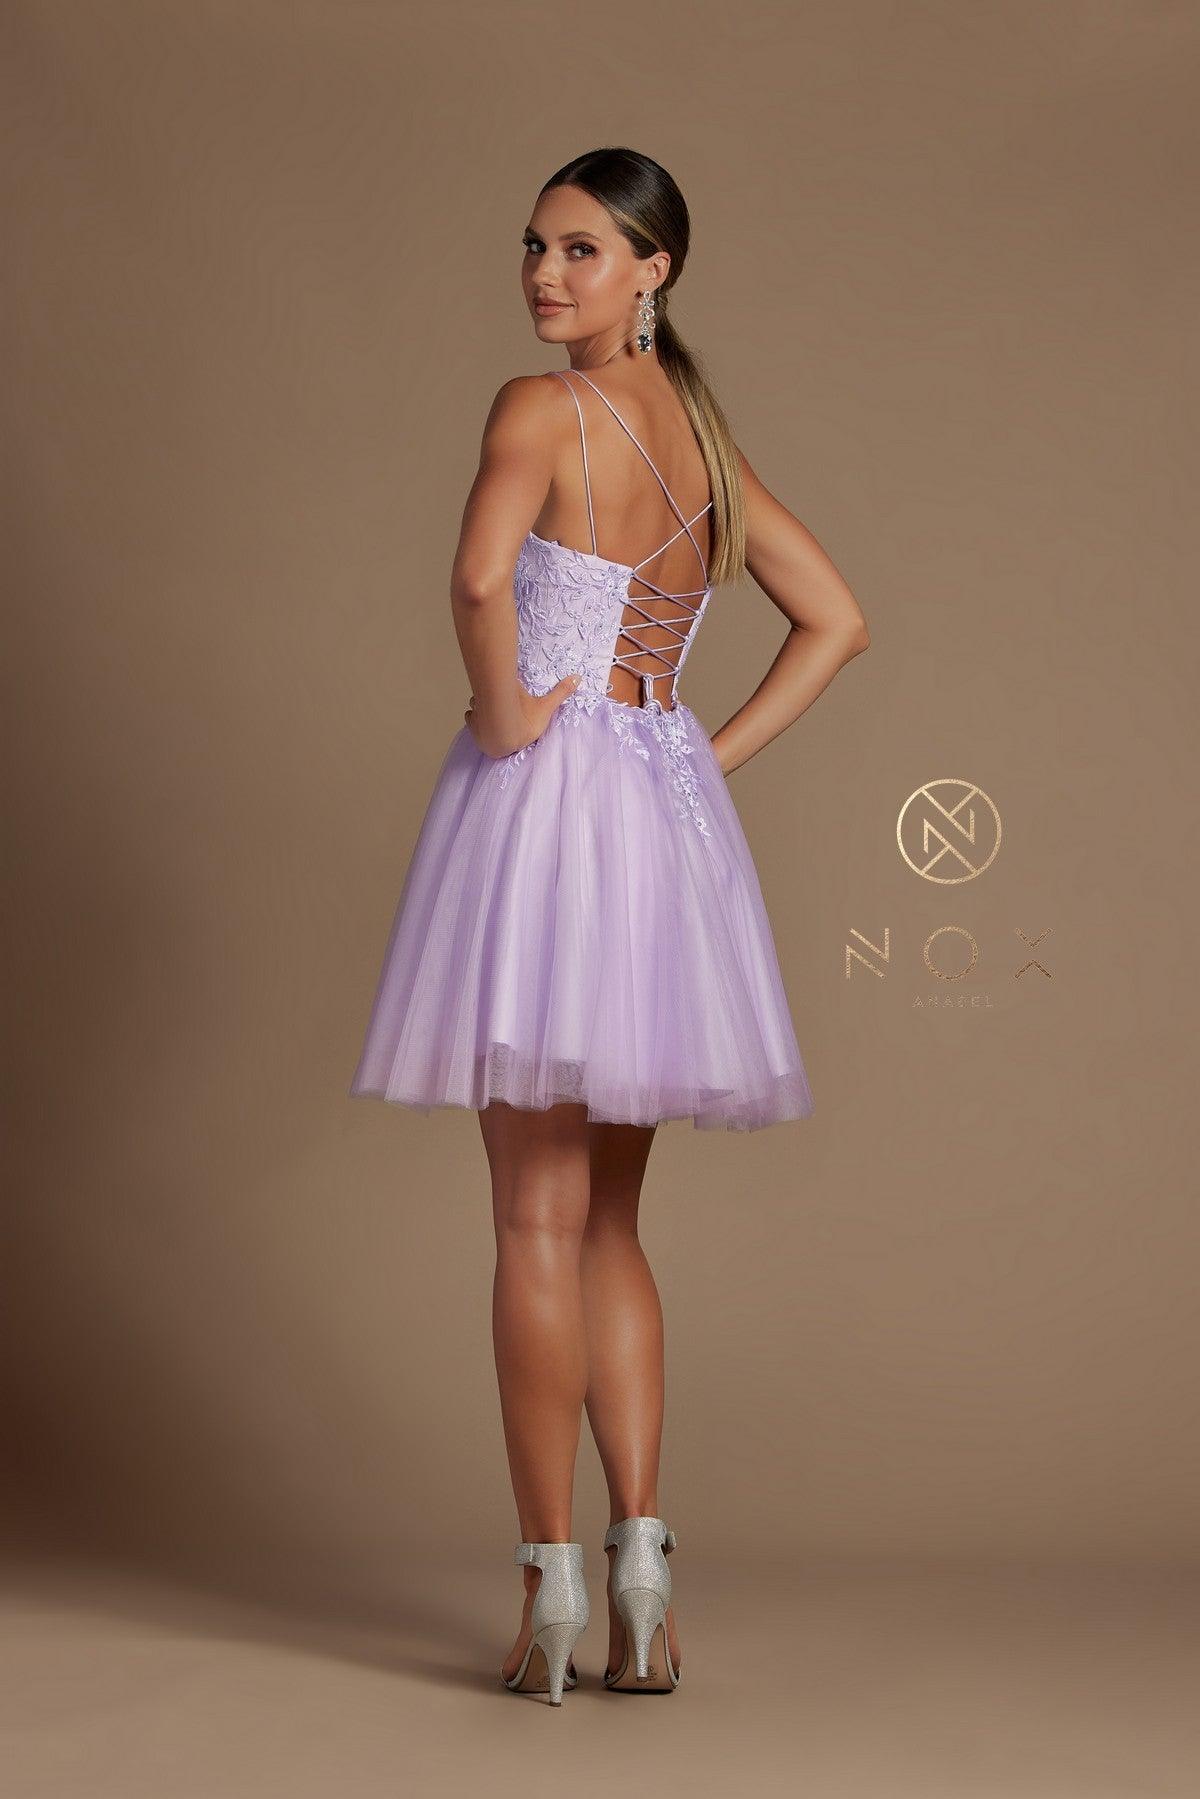 Short Spaghetti Strap Homecoming Dress Sale - The Dress Outlet